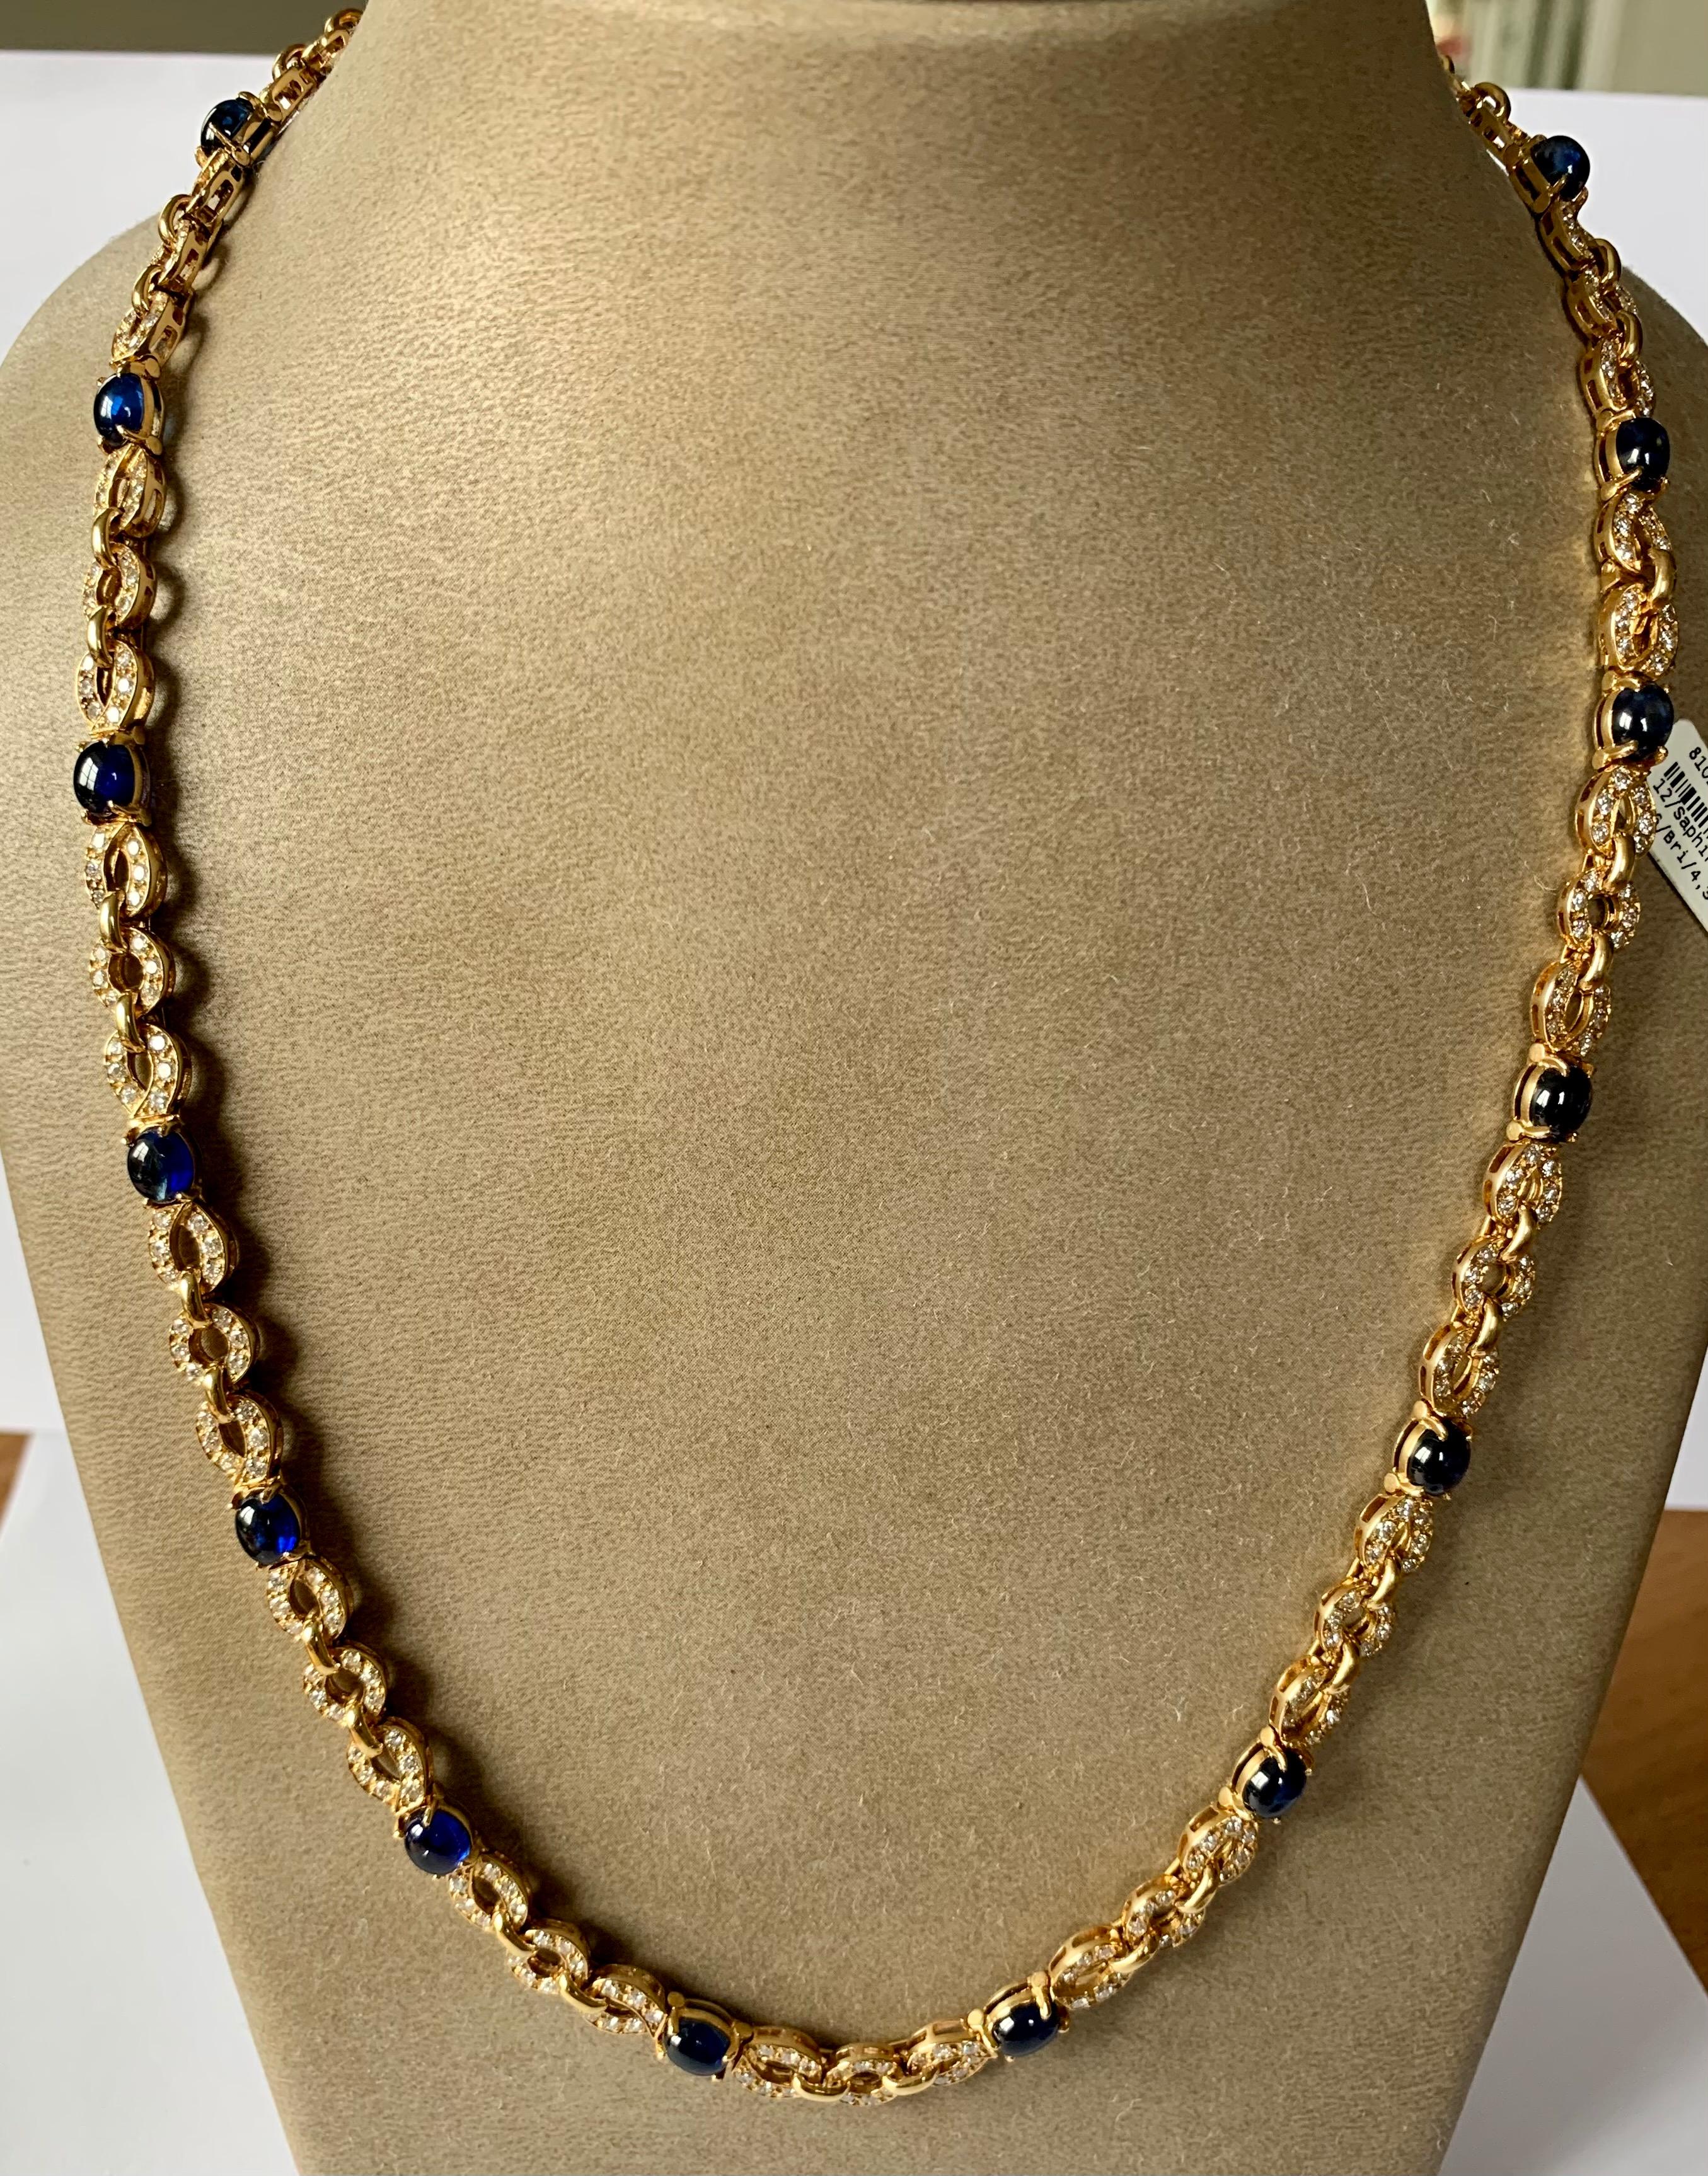 A classic 18 K yellow Gold Necklace signed Cartier, serial number 40446. The necklace can be worn long, length 56 cm or in a shorter version with the length of 38 cm and and a bracelet with the length of 18 cm. set w ith 18 fine Sapphire Cabochons